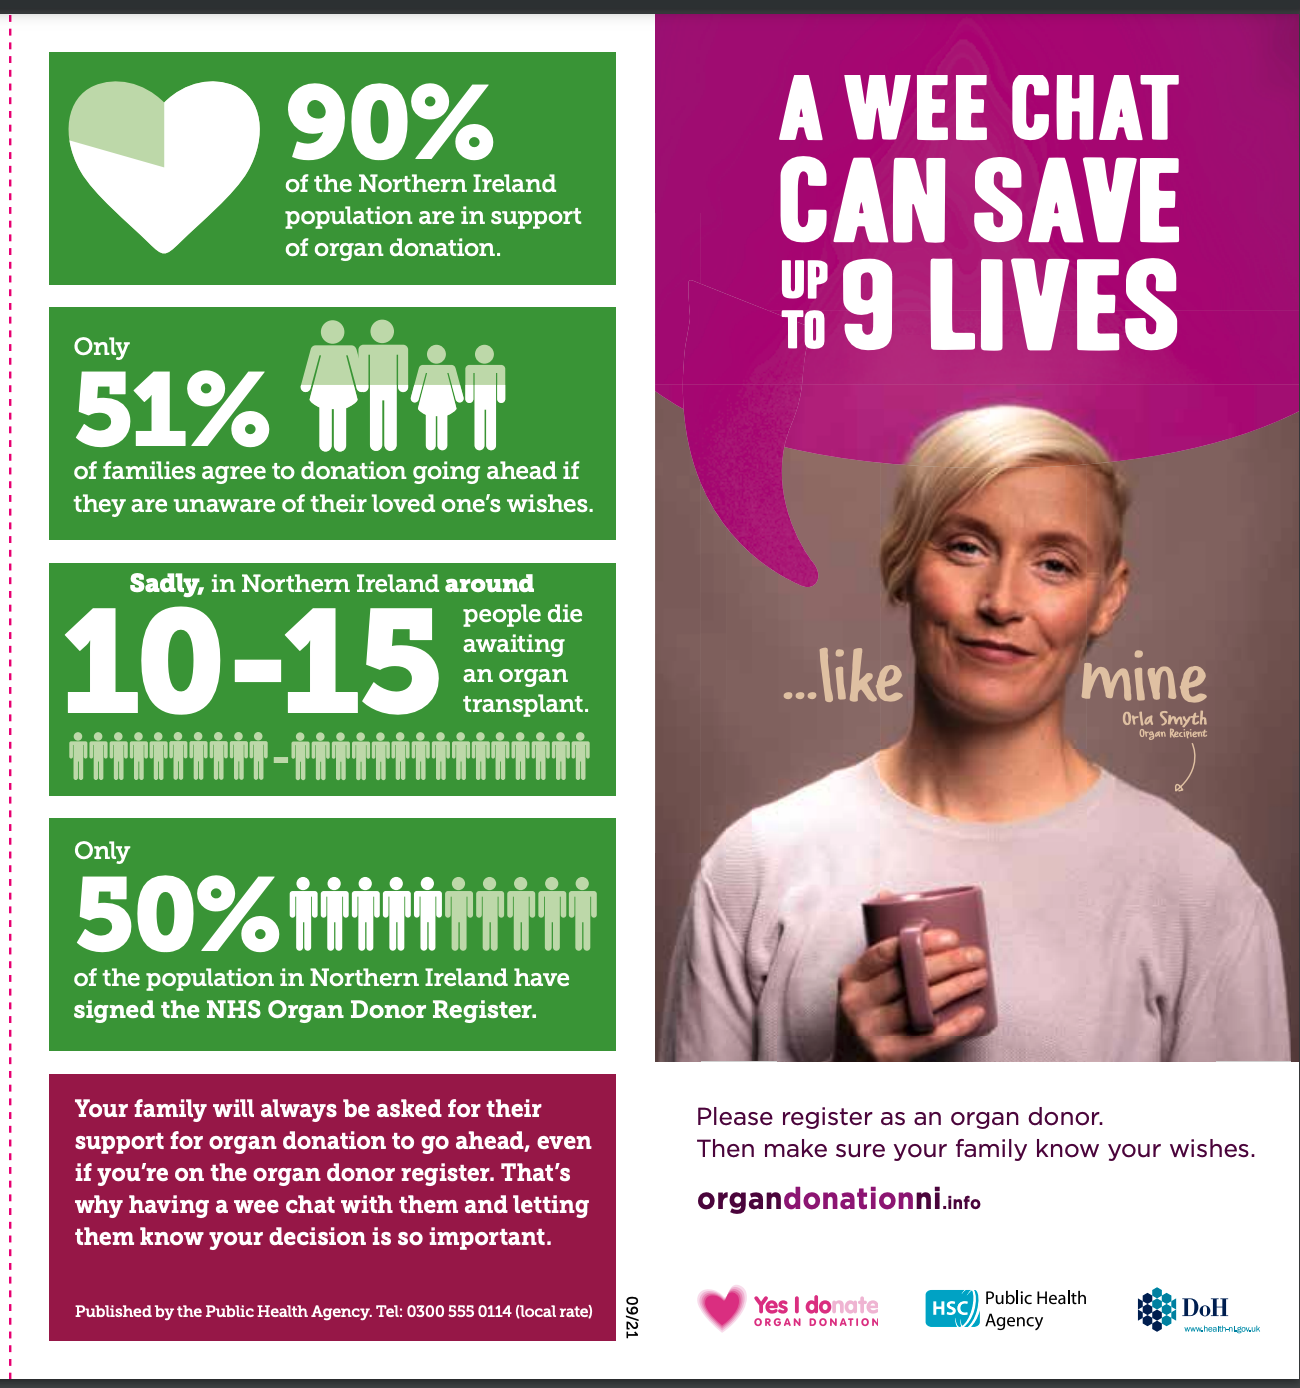 A Wee Chat Can Save Up To 9 Lives